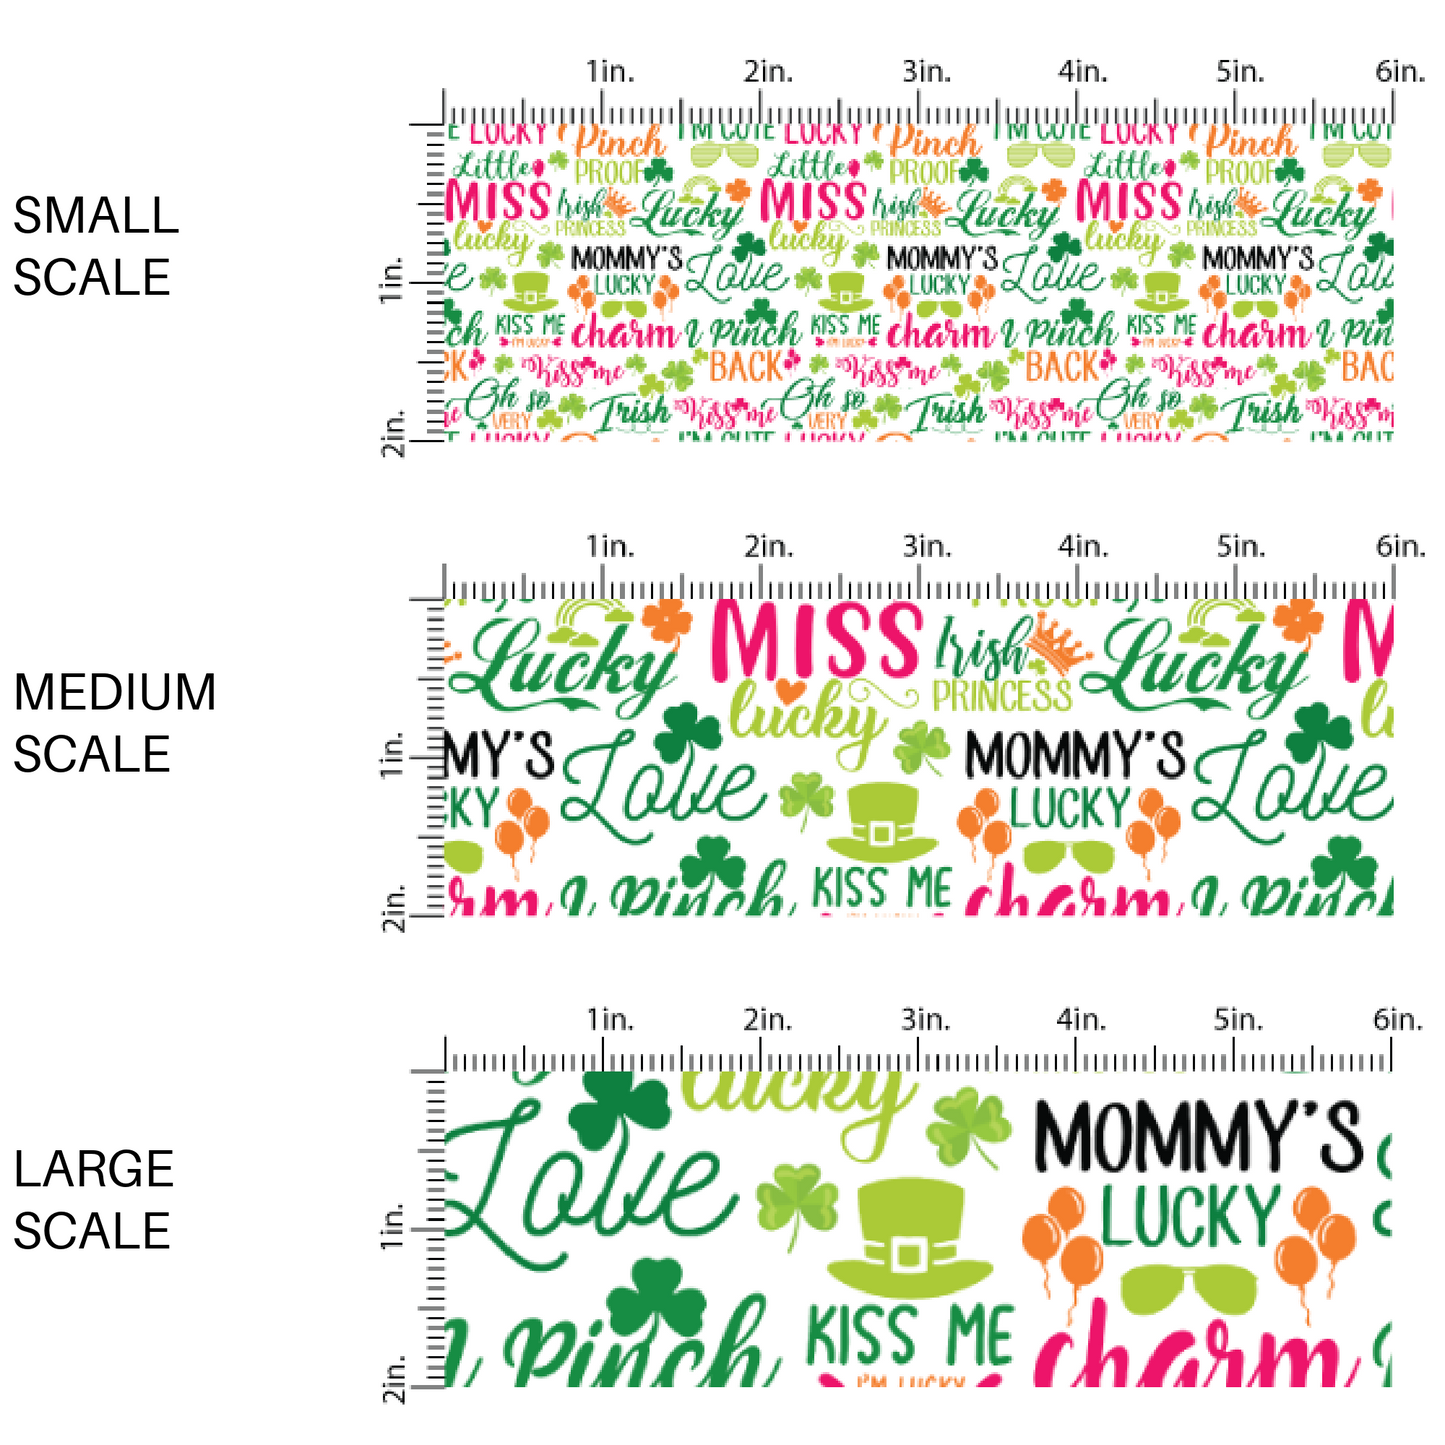 Colorful "irish princess, kiss me, i'm lucky, oh so very lucky, pinch proof" sayings on fabric by the yard scaled image guide